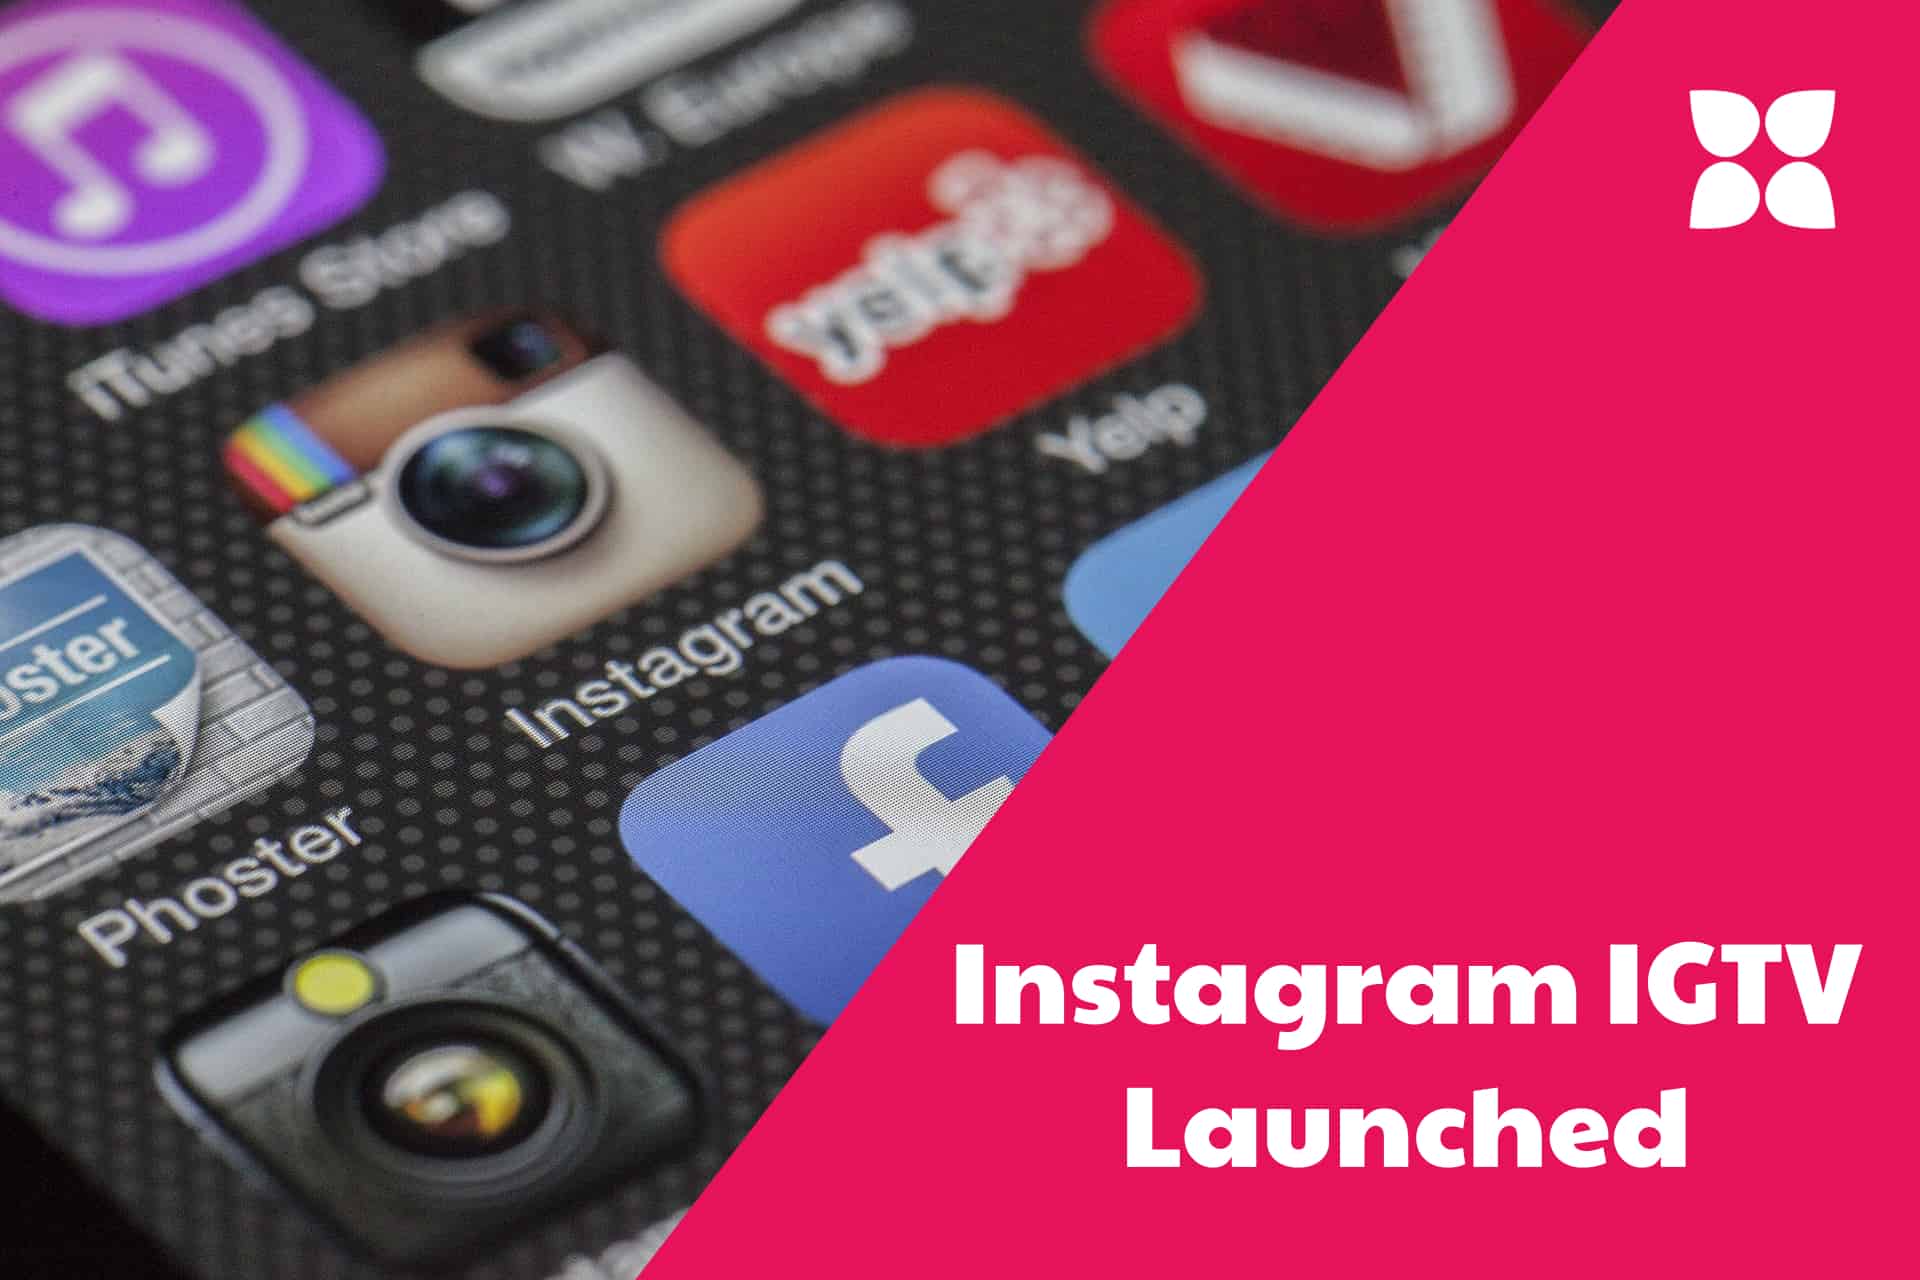 Instagram Releases New Guide to Creating and Uploading IGTV Content